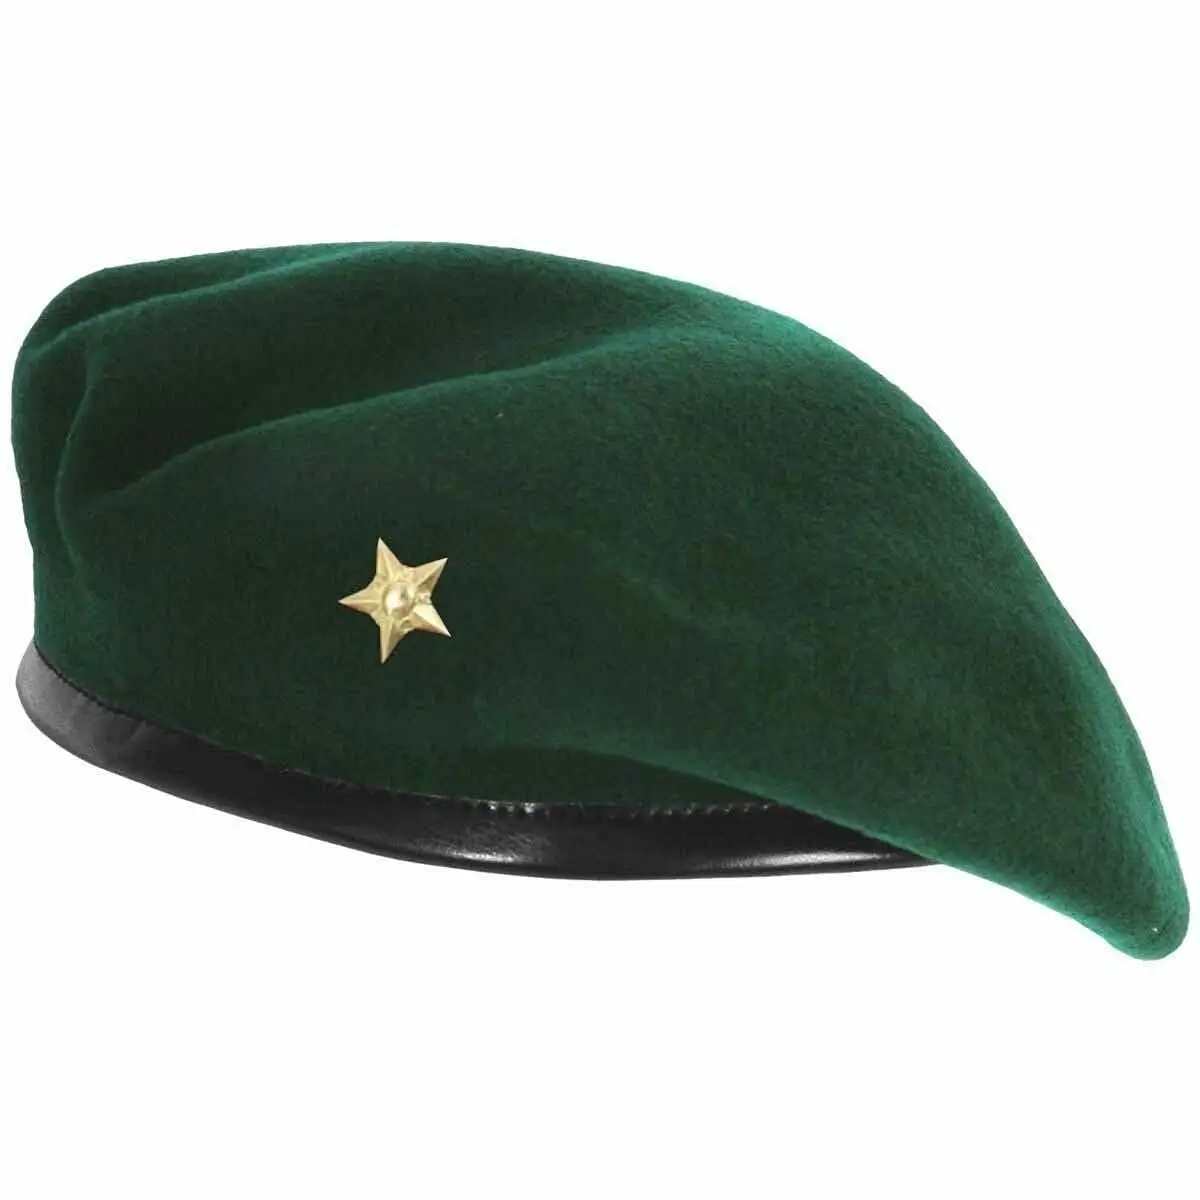 Wholesale Custom Hats Ladies Green Embroidered Satin Lined Cotton Wool Women Knitted tactical Beret